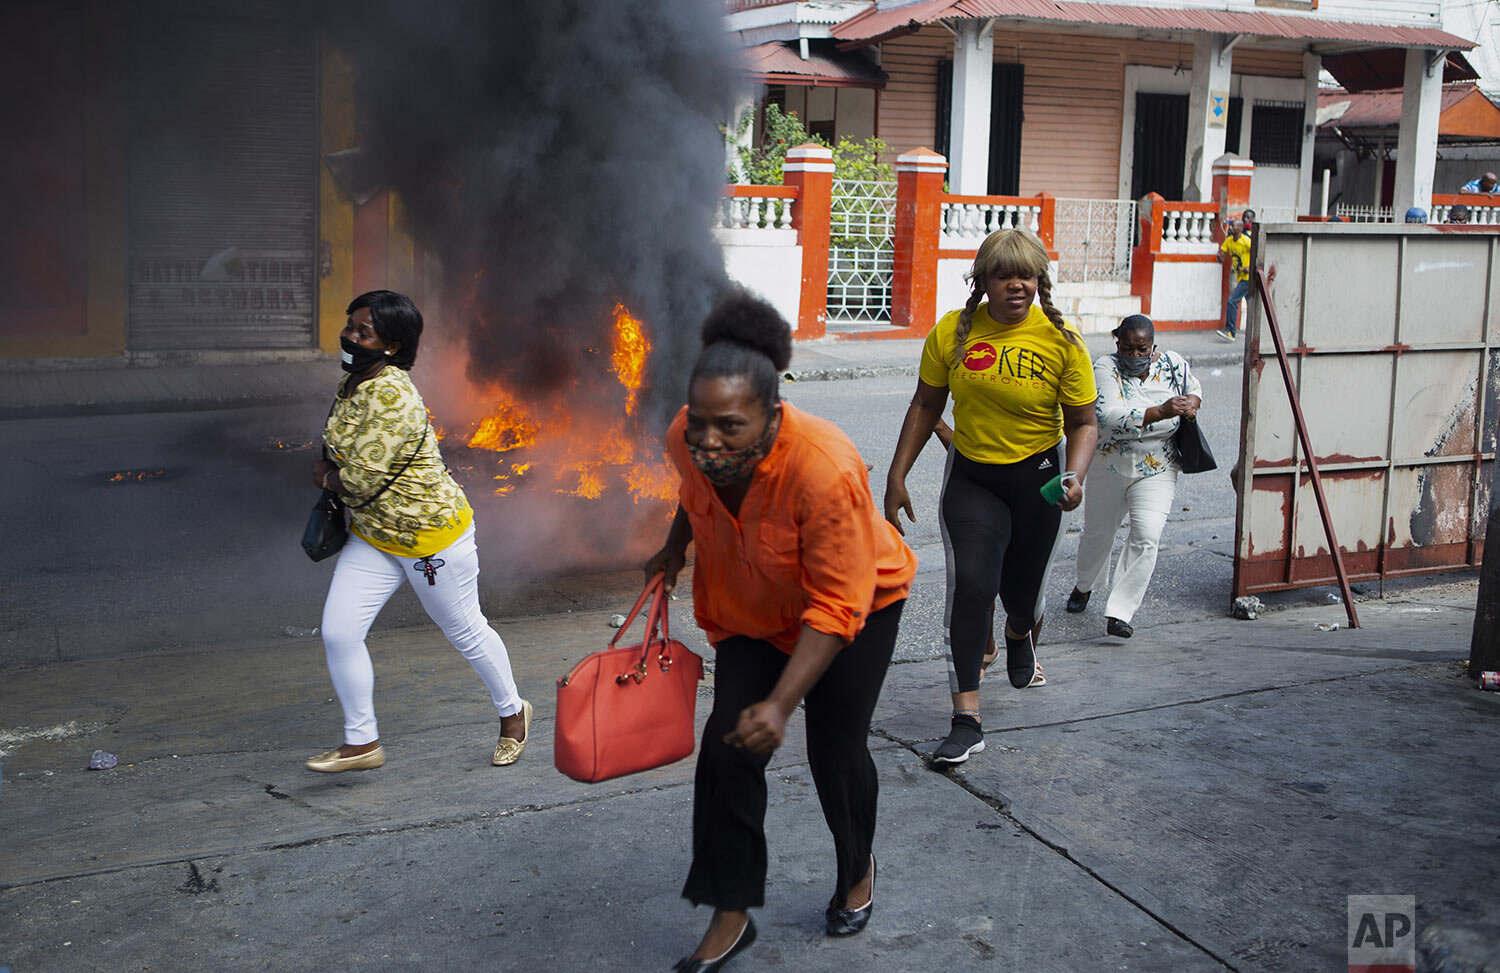  People run past a a barricade set fire by protesters demanding President Jovenel Moise resign in Port-au-Prince, Haiti, Jan. 15, 2021 (AP Photo/Joseph Odelyn) 